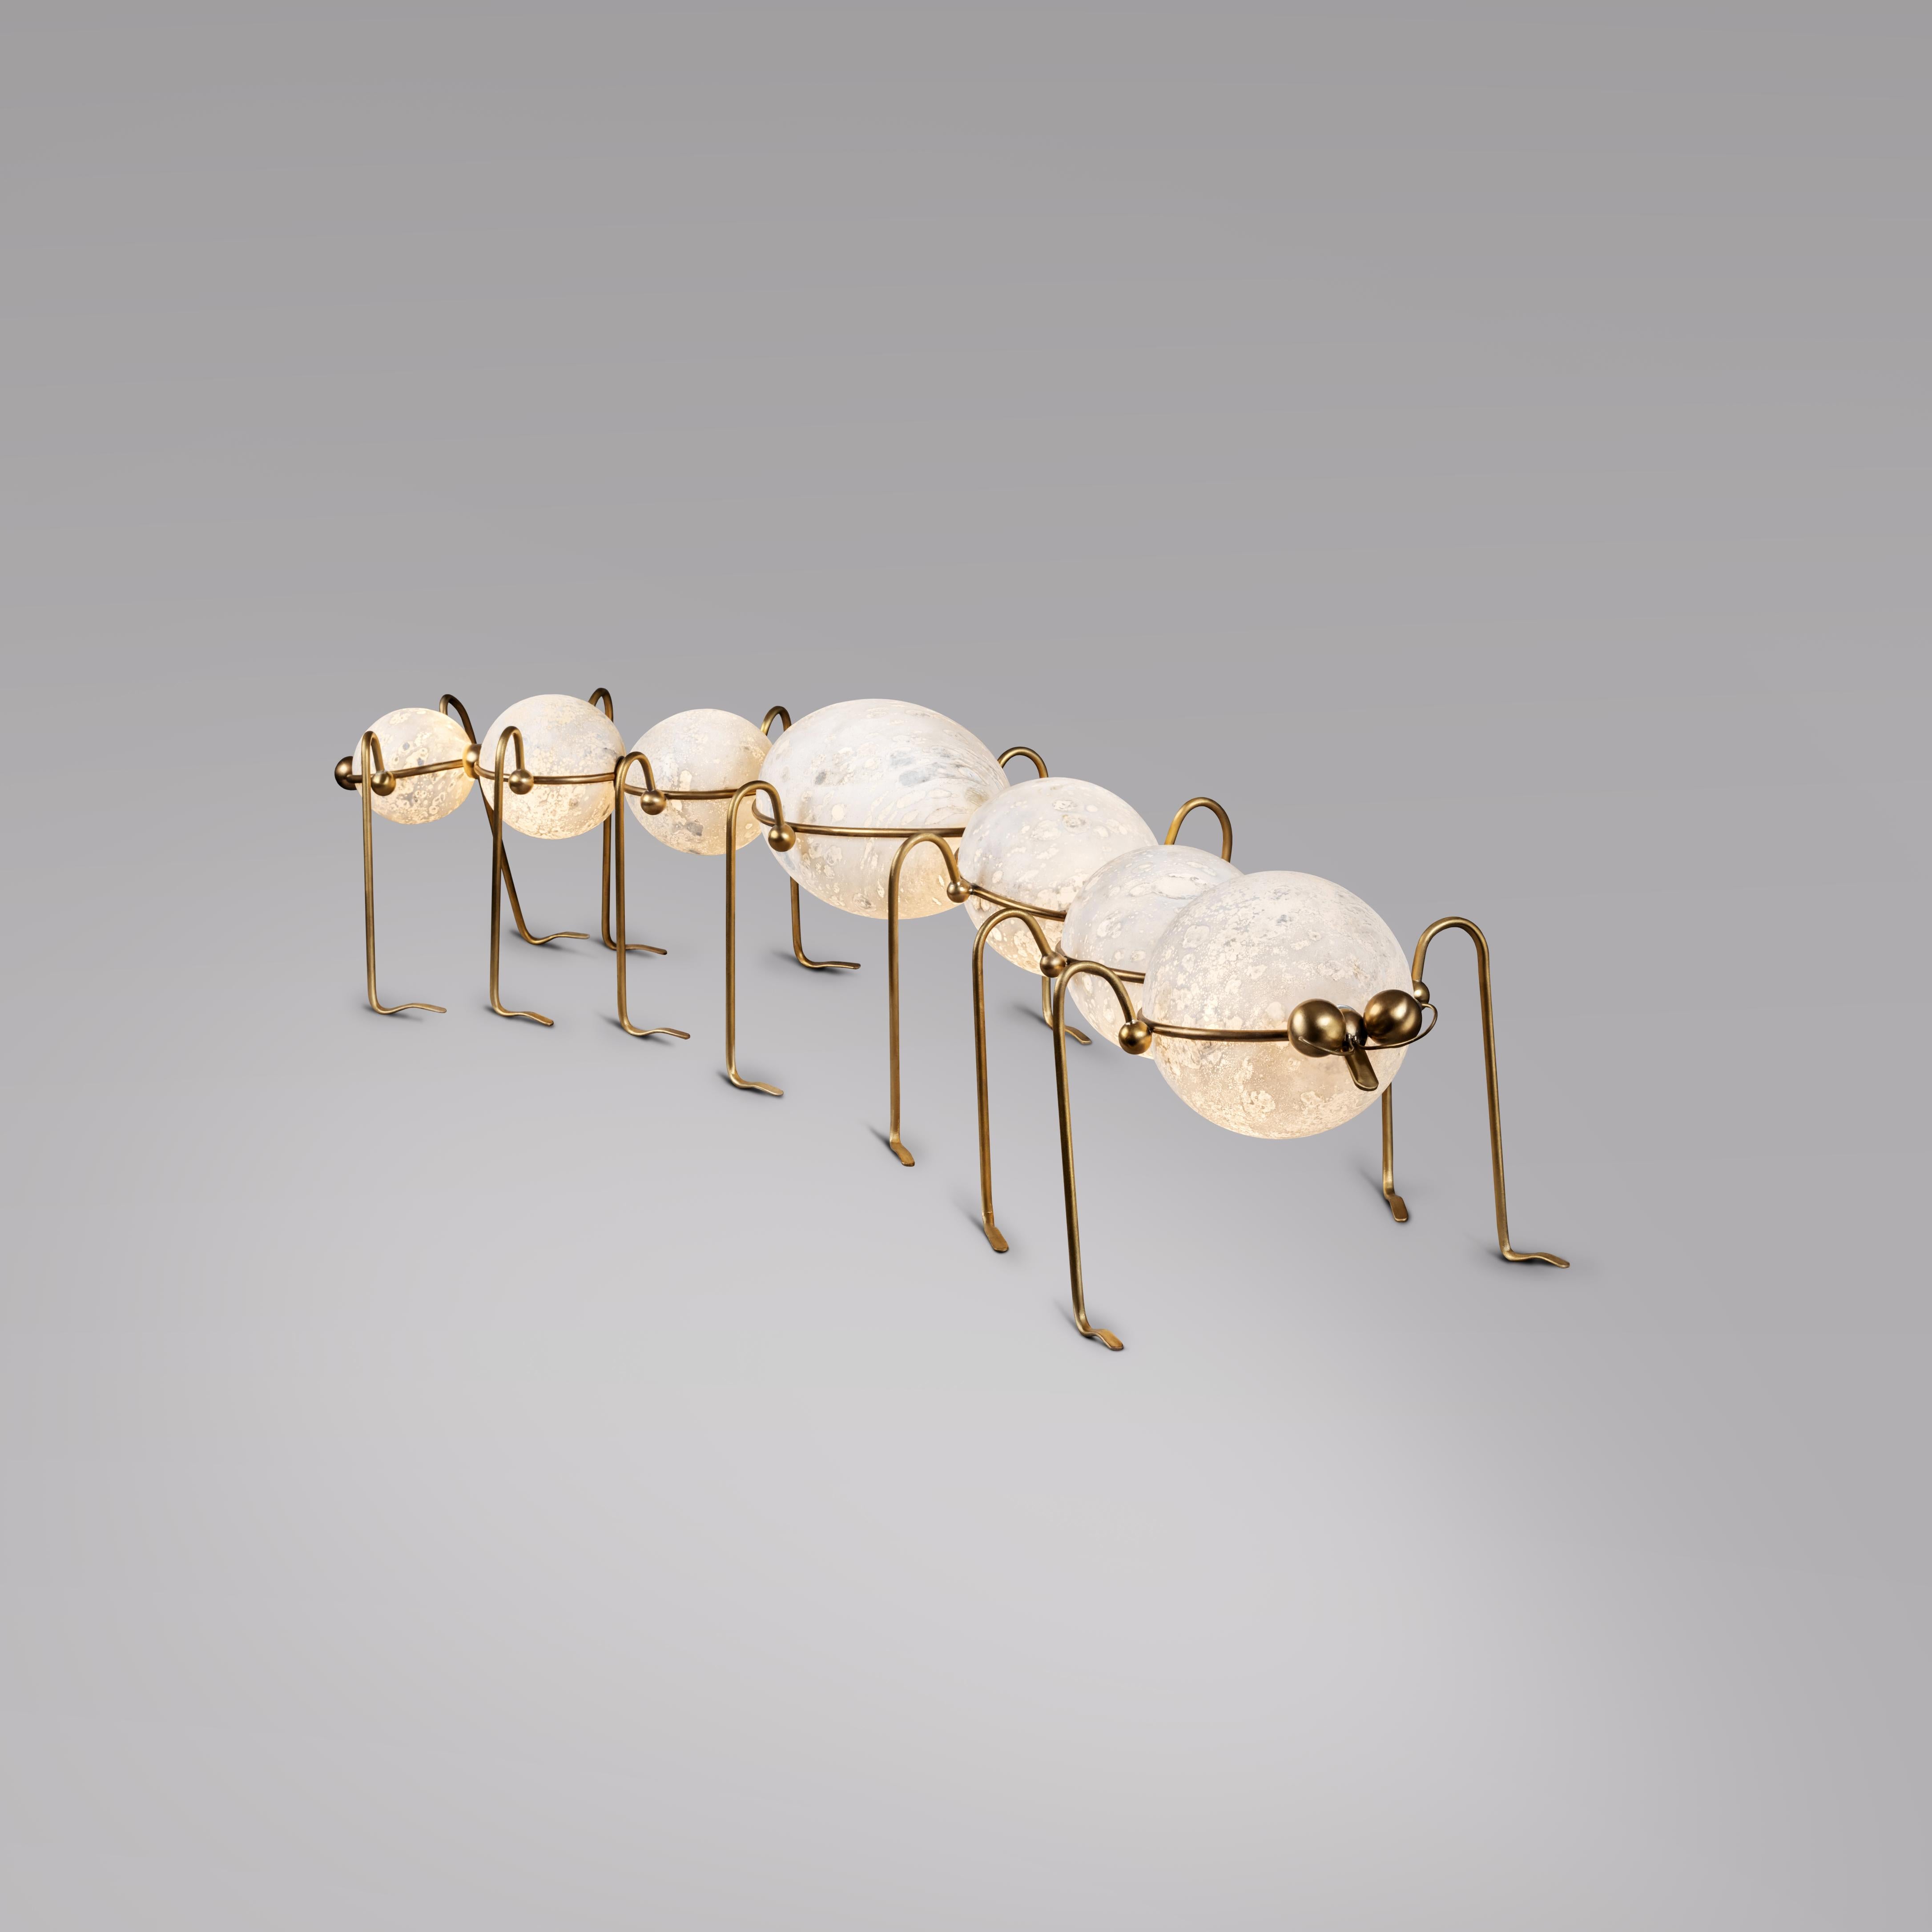 Caterpillar, floor lamp sculpture, Vincent Darré and Ludovic Clément d’Armont
Blown glass, textile, brass.
Dimensions: 22 x 105 x 30 cm.

Created in cooperation with designer Vincent Darré, insects are funny and original sculptures. They come